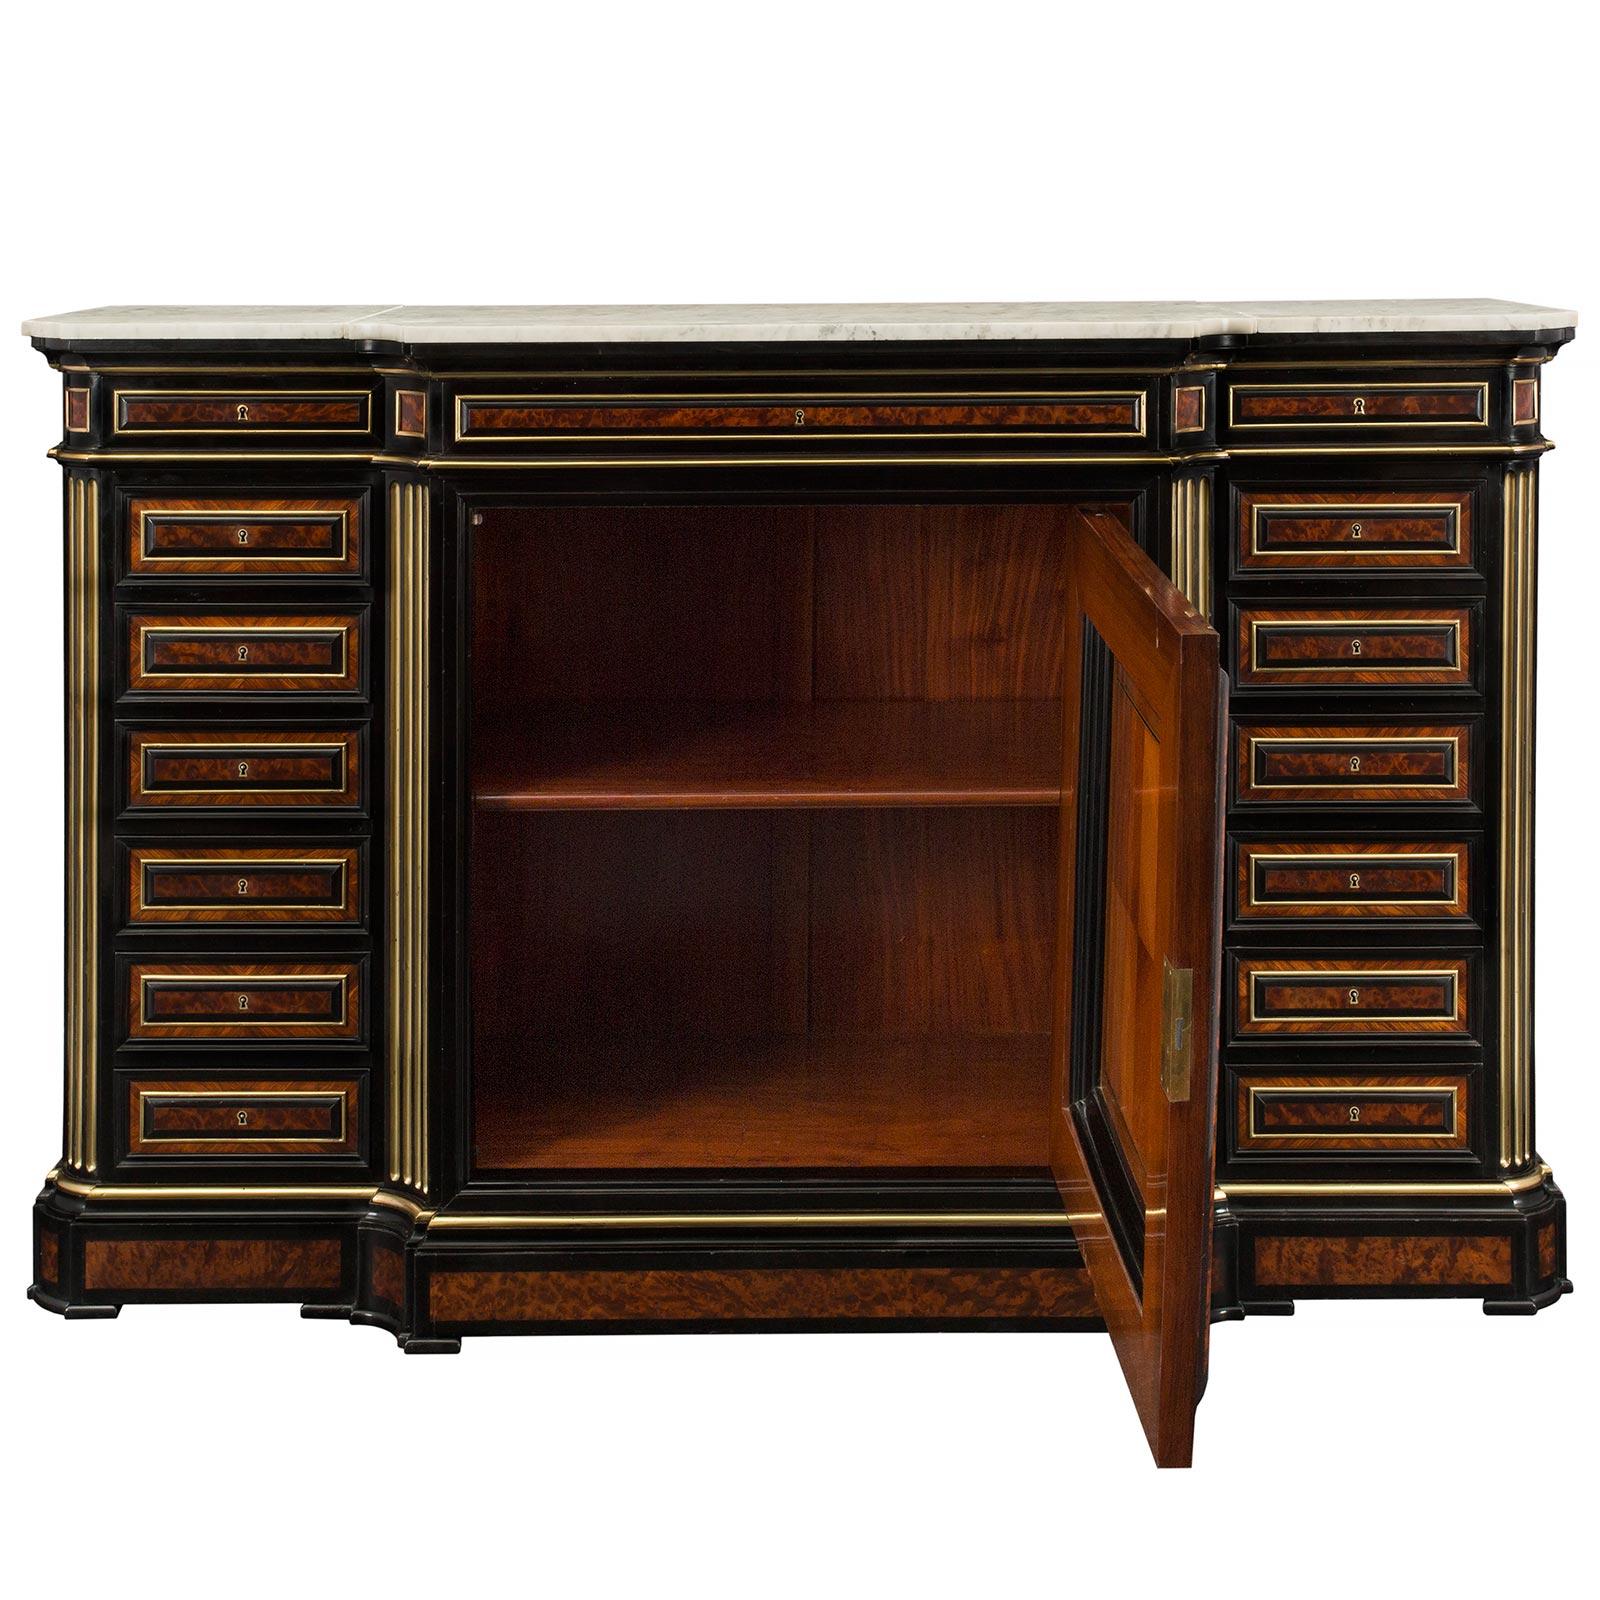 A spectacular and most impressive French 19th century Louis XVI st. burl walnut and ormolu cabinet by Guillaume Grohé. The cabinet is raised by ebony block supports below the frieze with a protruding central section. The cabinet door is elaborately